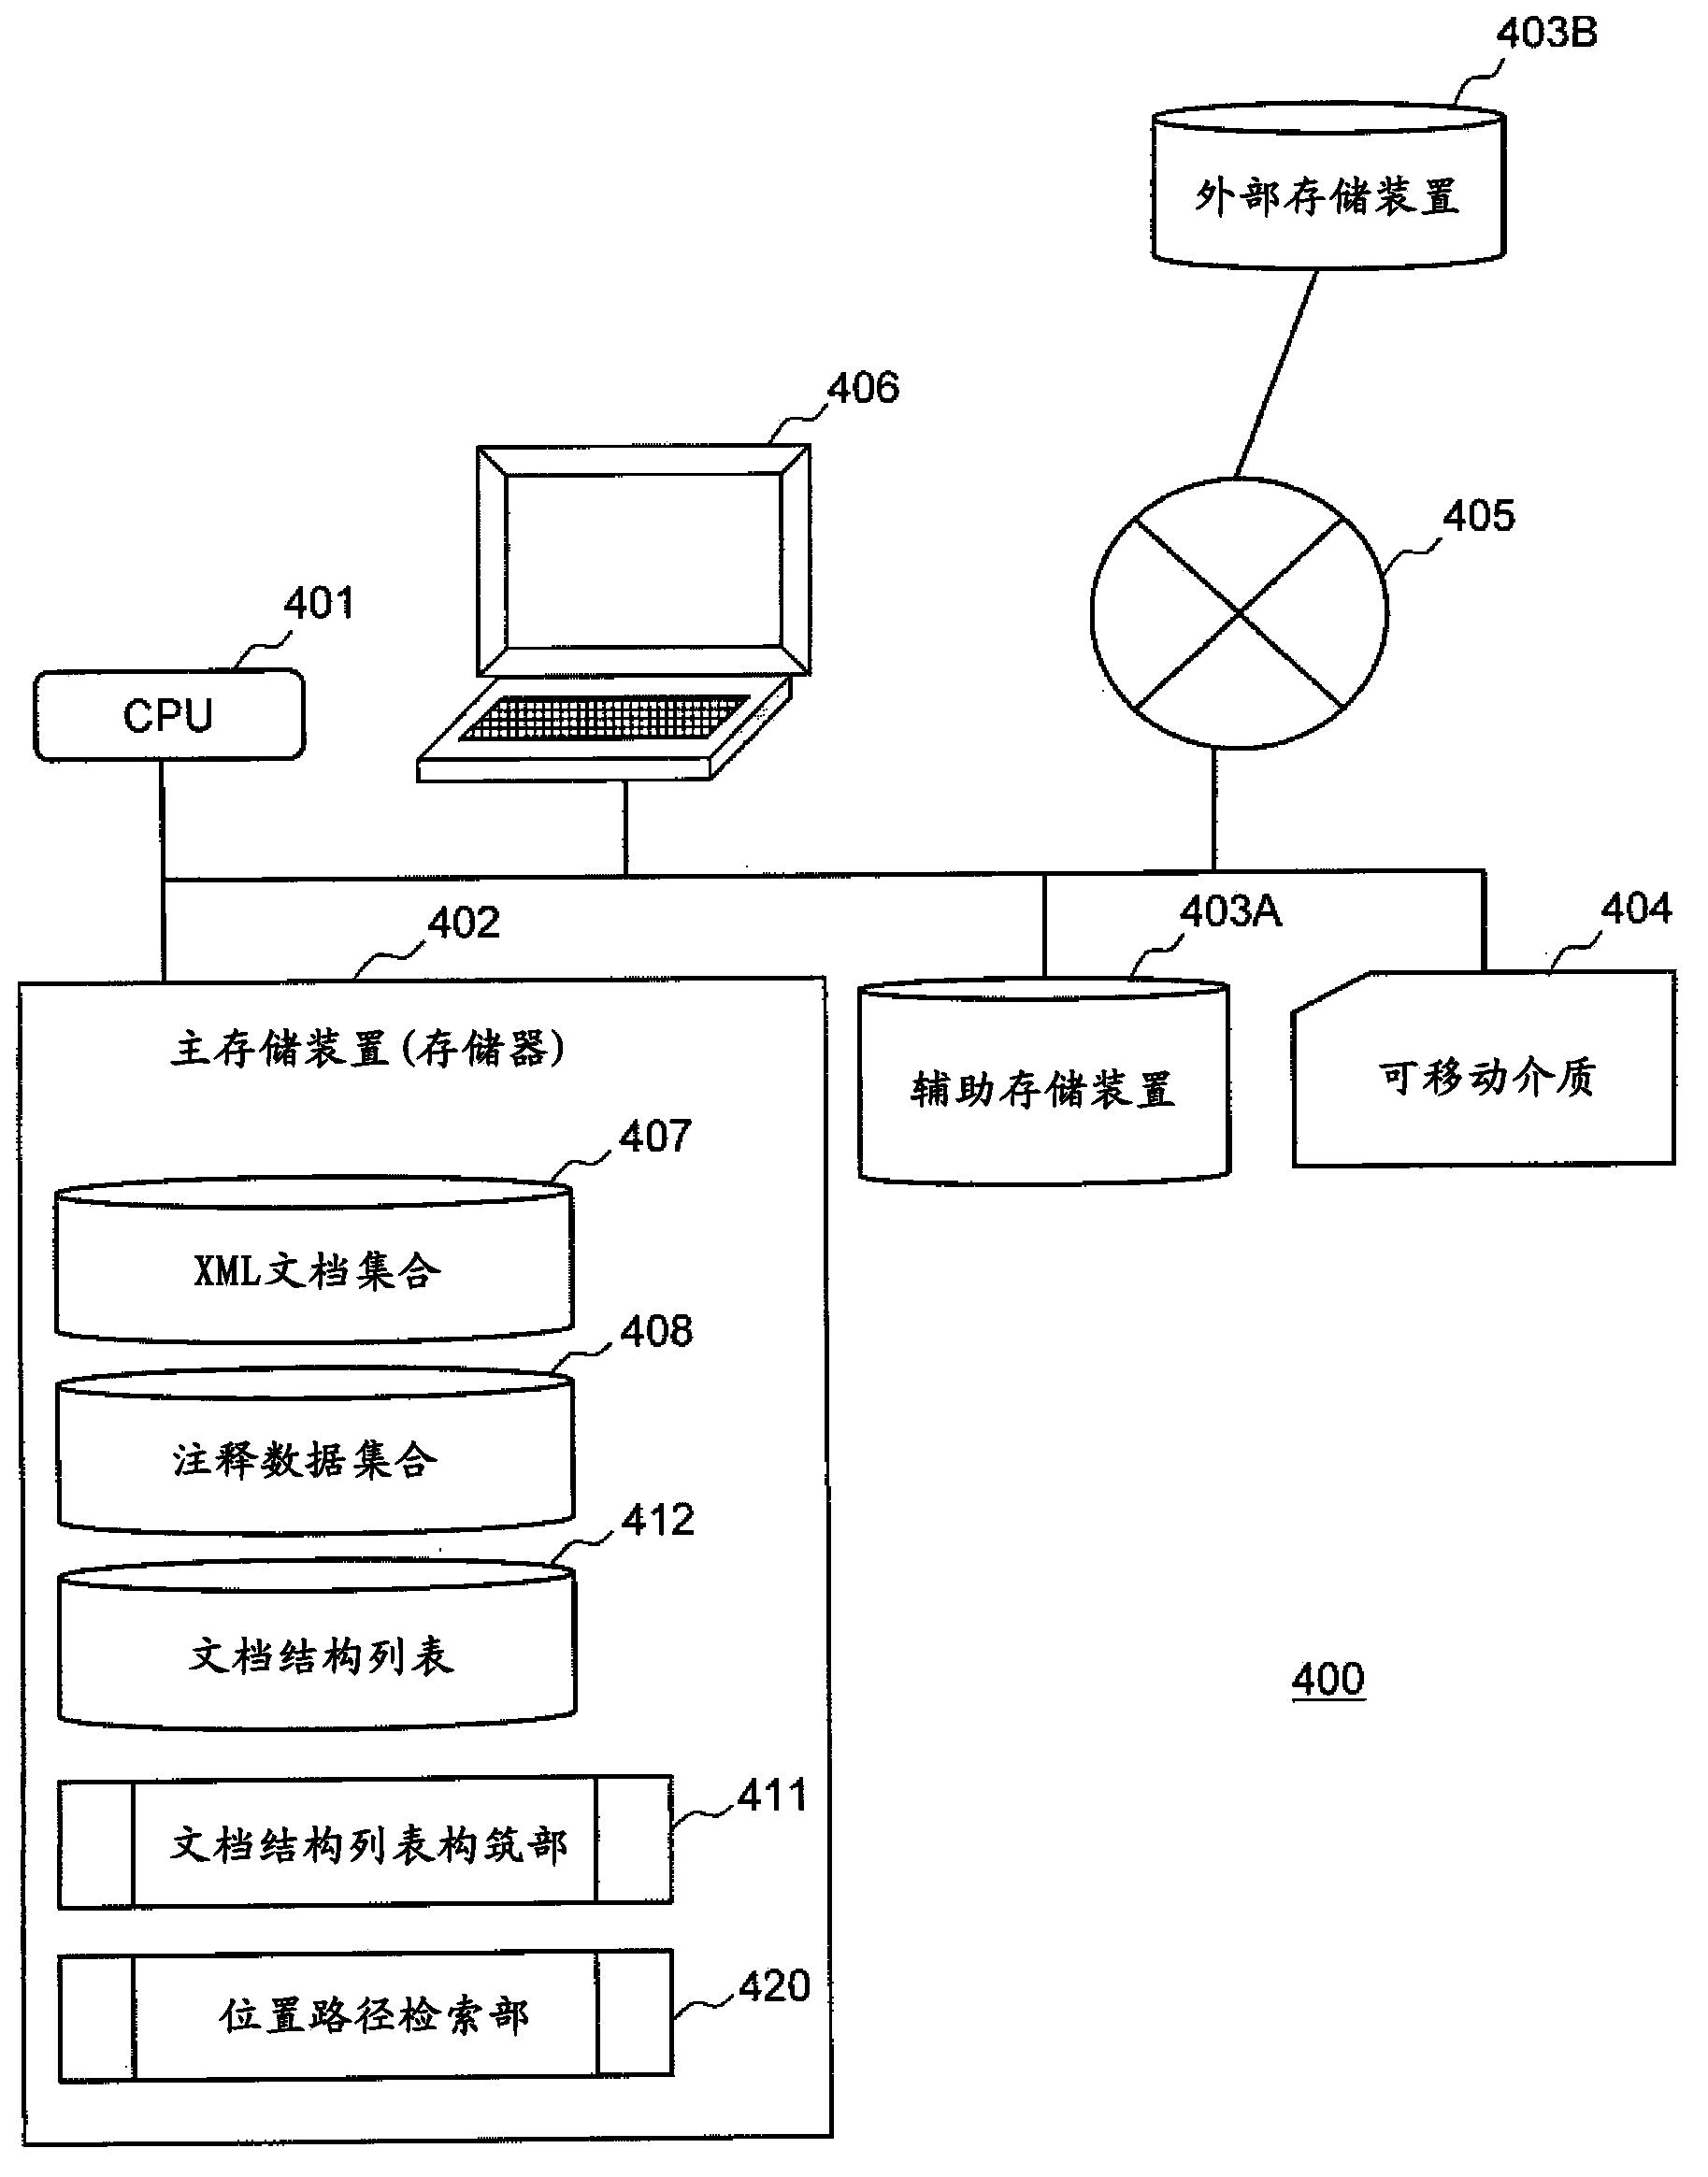 Structured document retrieval device and program